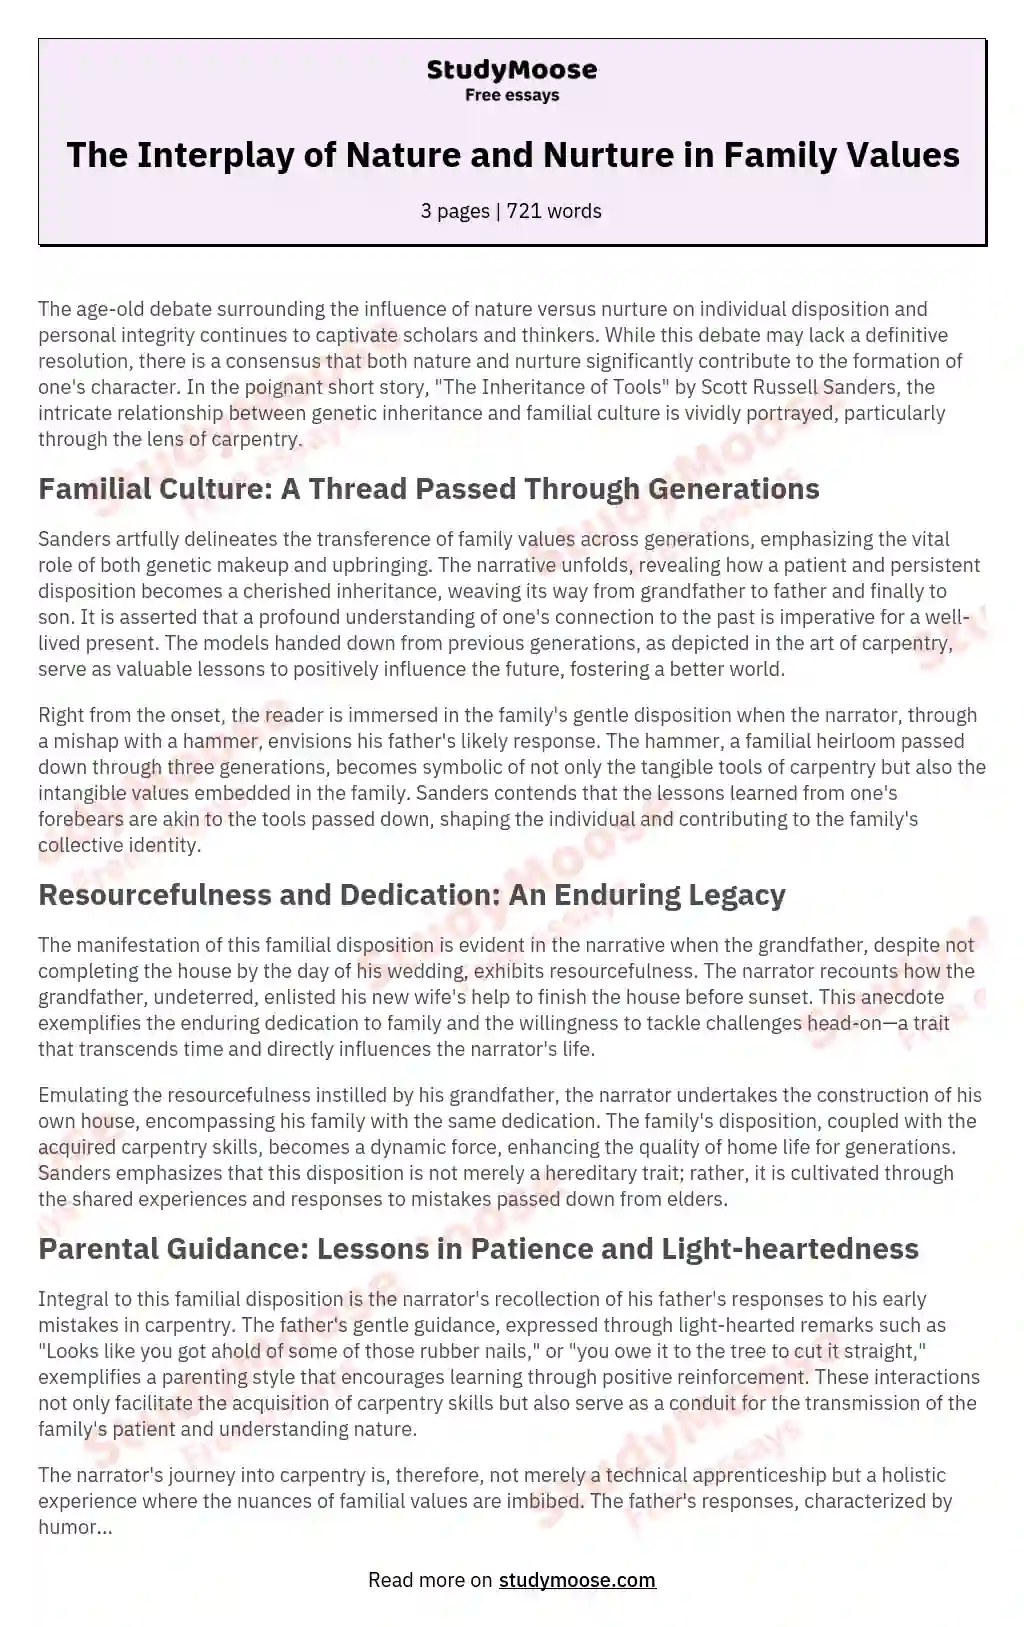 The Interplay of Nature and Nurture in Family Values essay